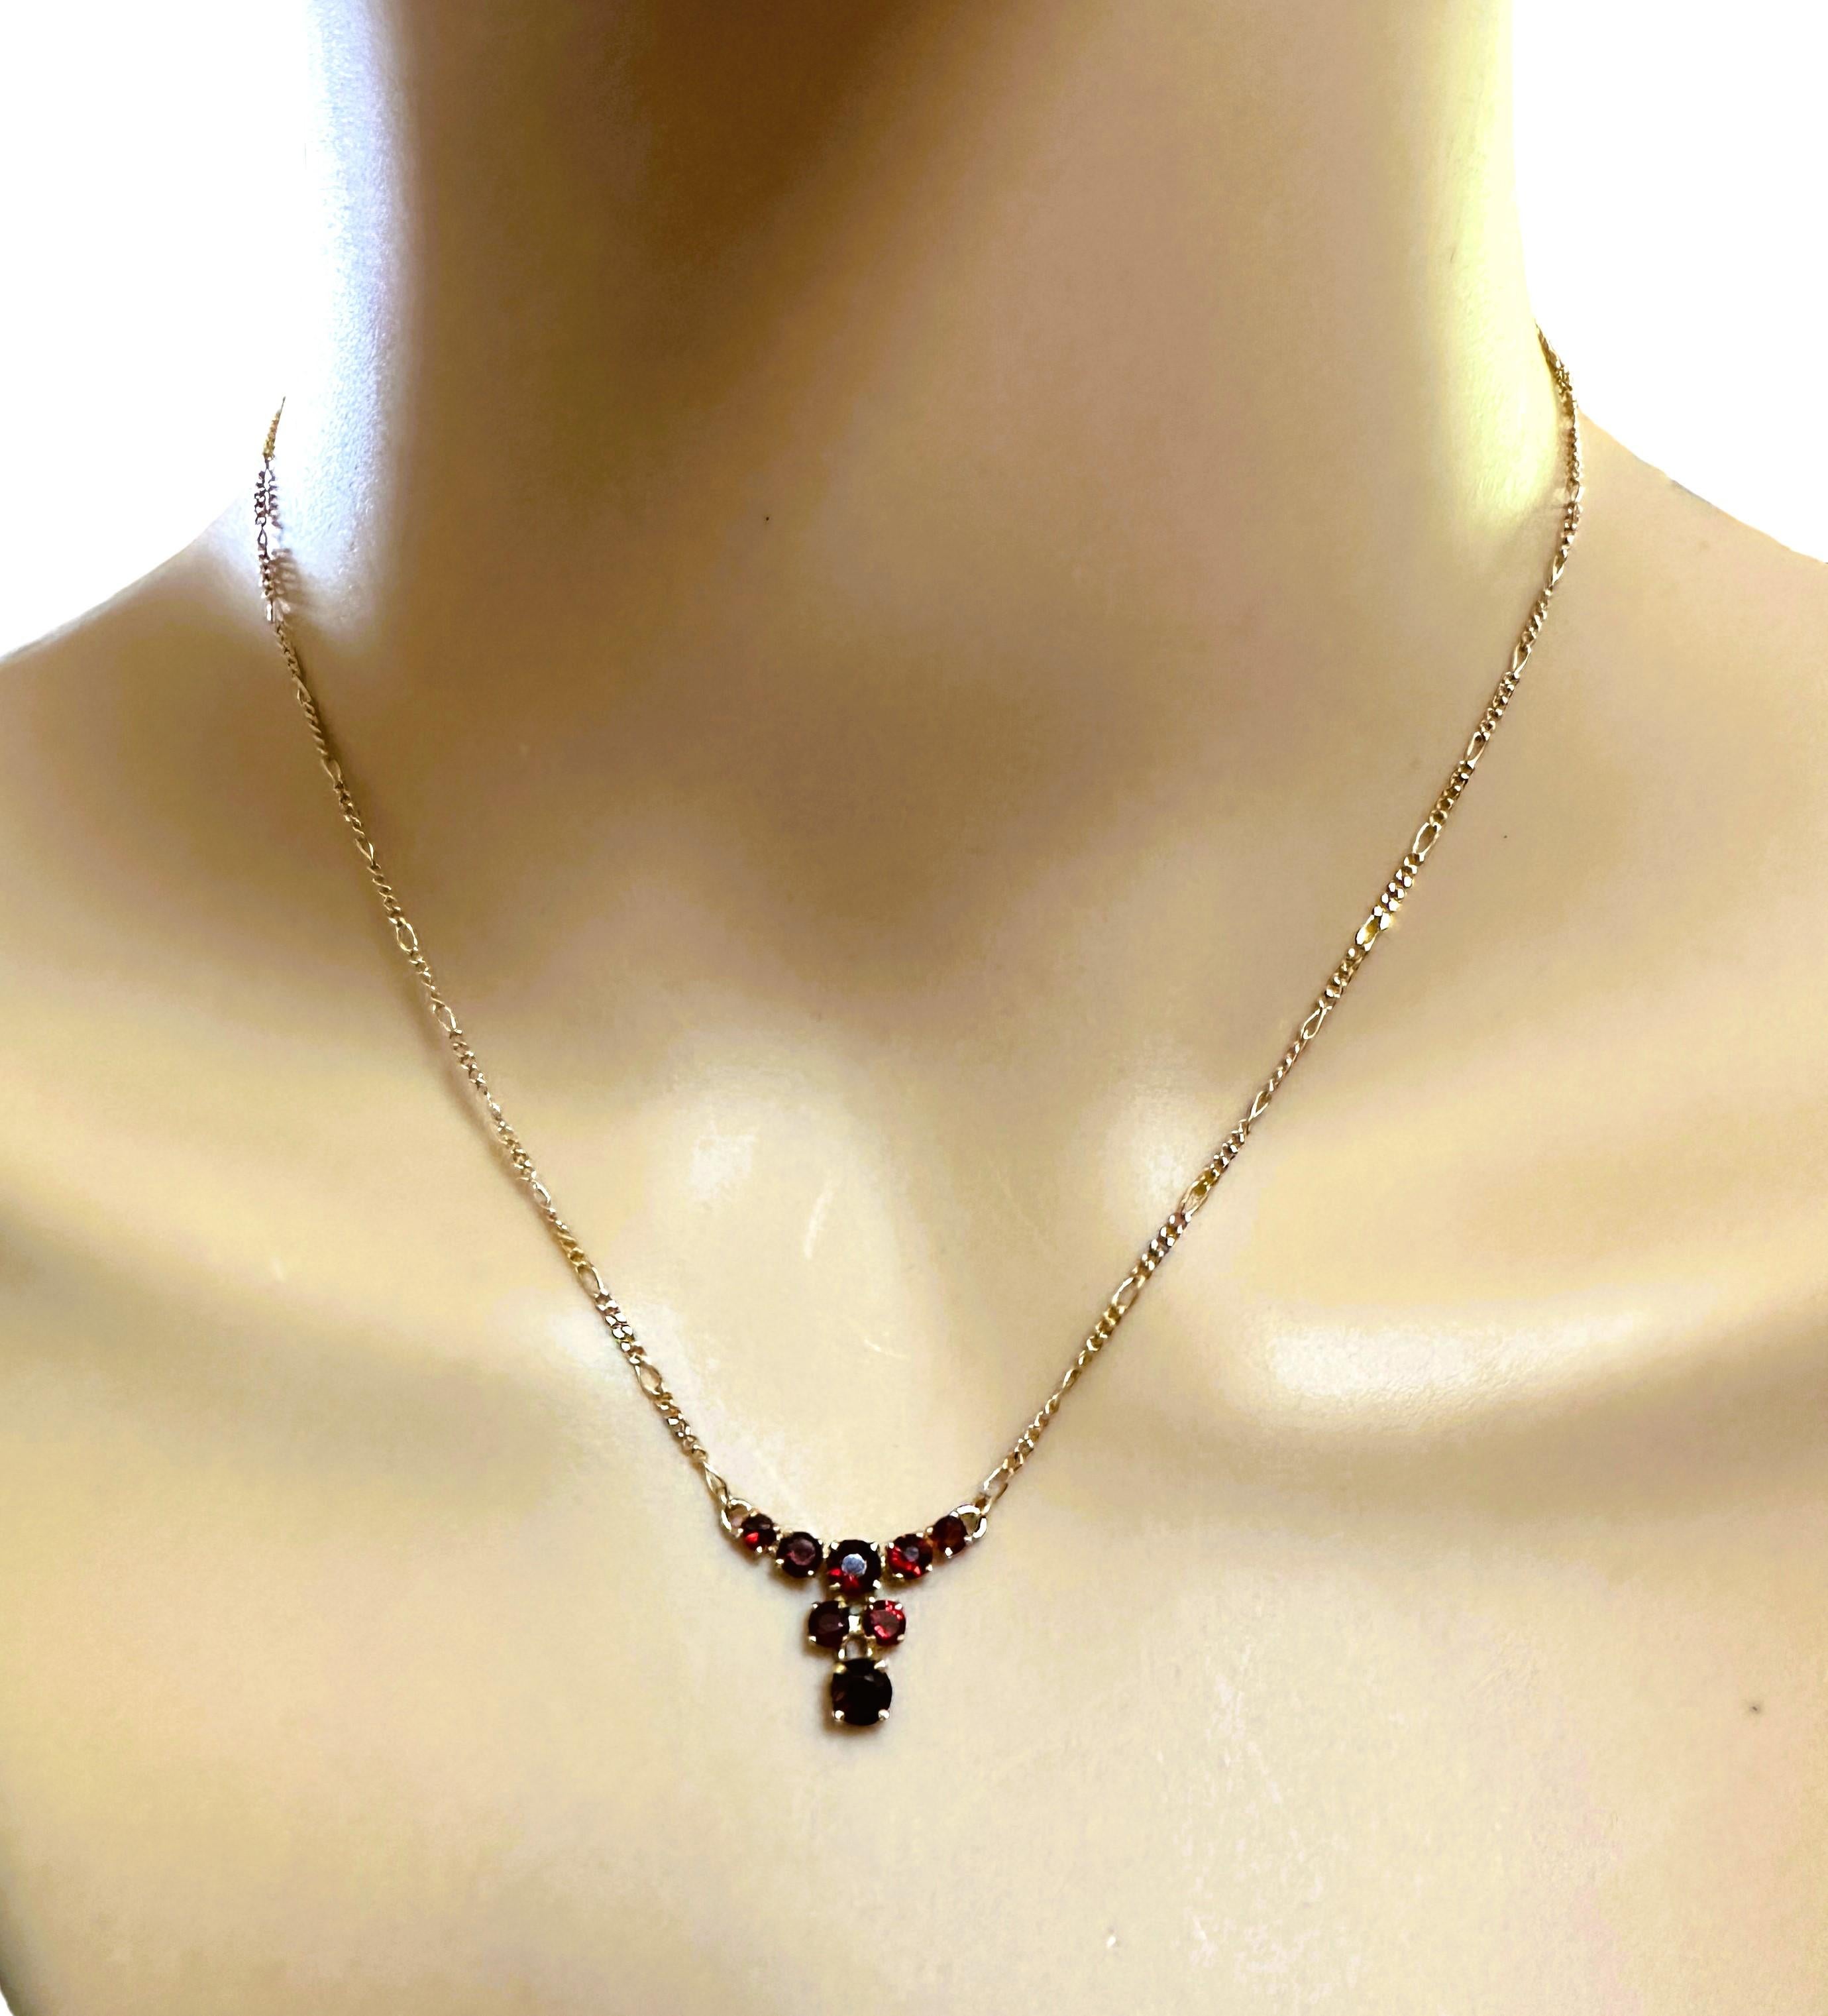 This is a gorgeous and delicate necklace!  It is pre-owned but in fabulous condition.  It has 8 beautiful Garnet stones forming a 